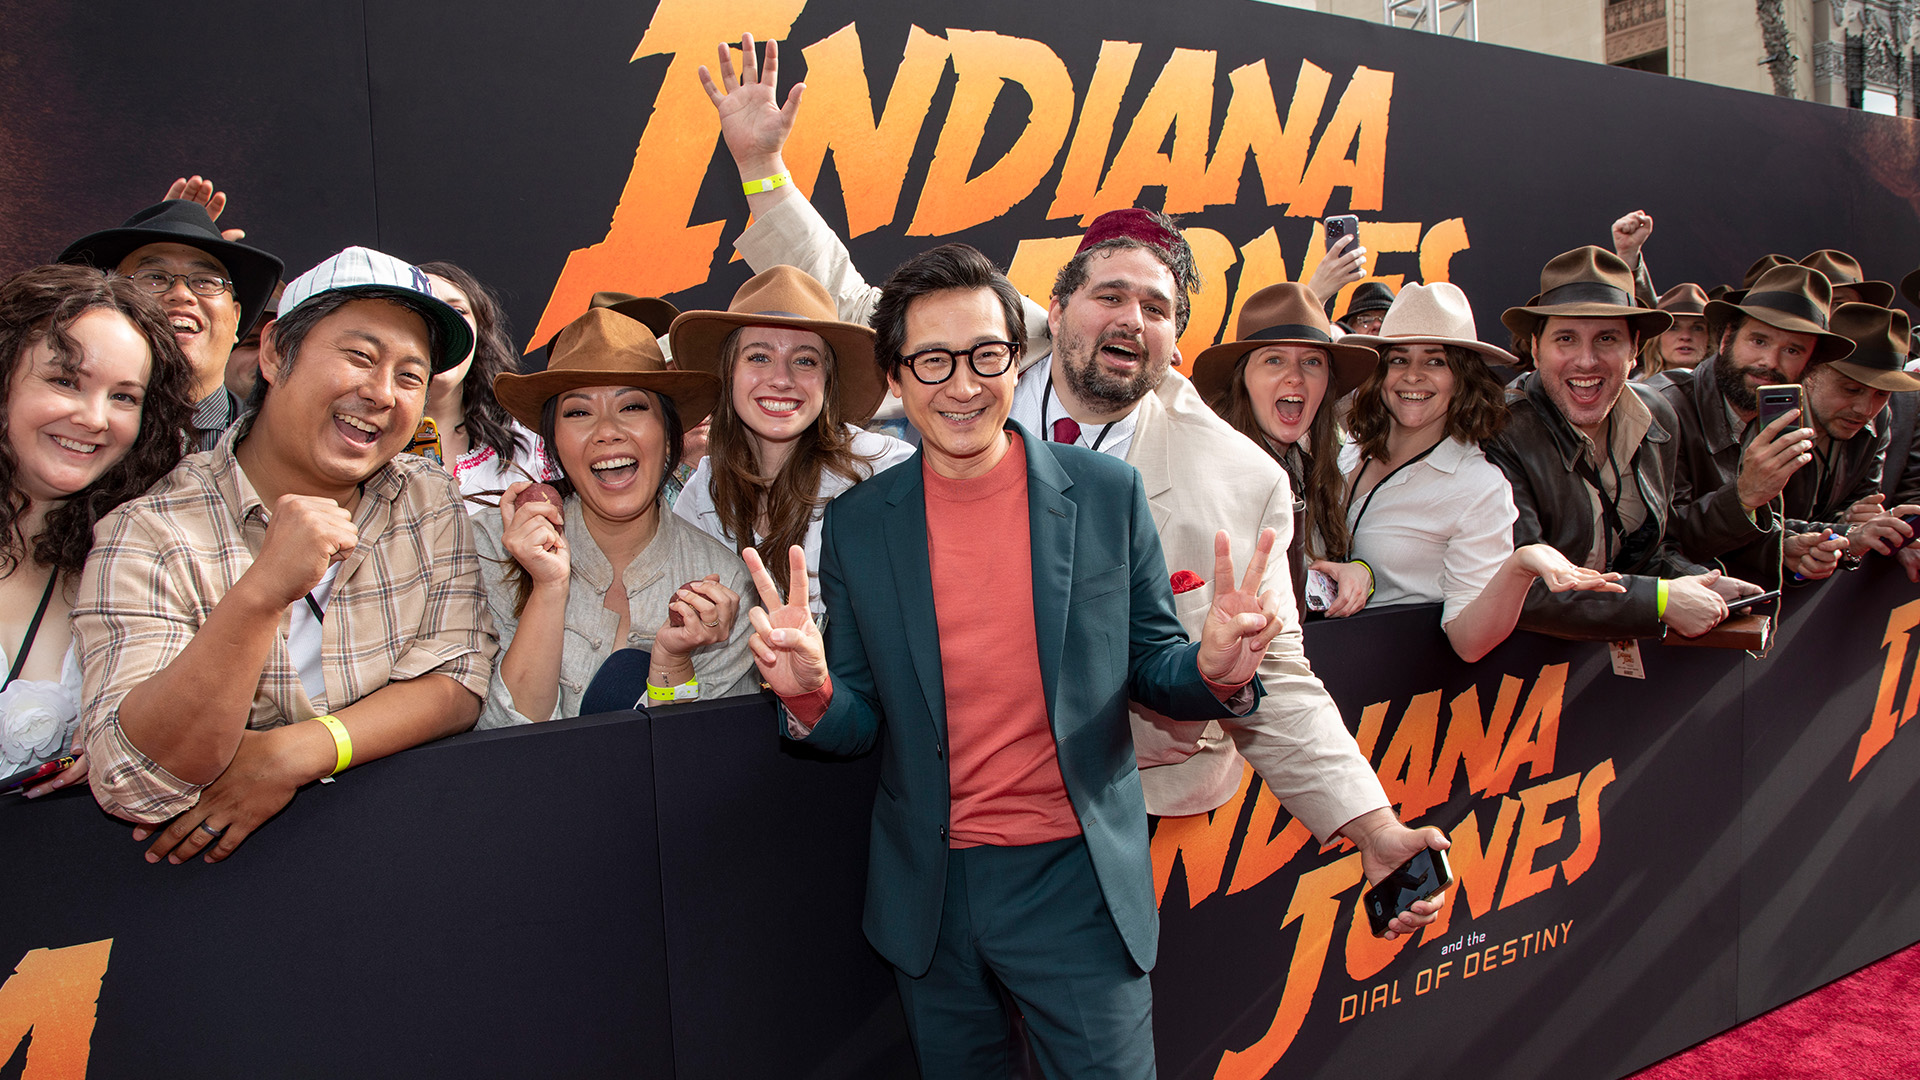 Ke Huy Quan with fans at the Indiana Jones premiere.